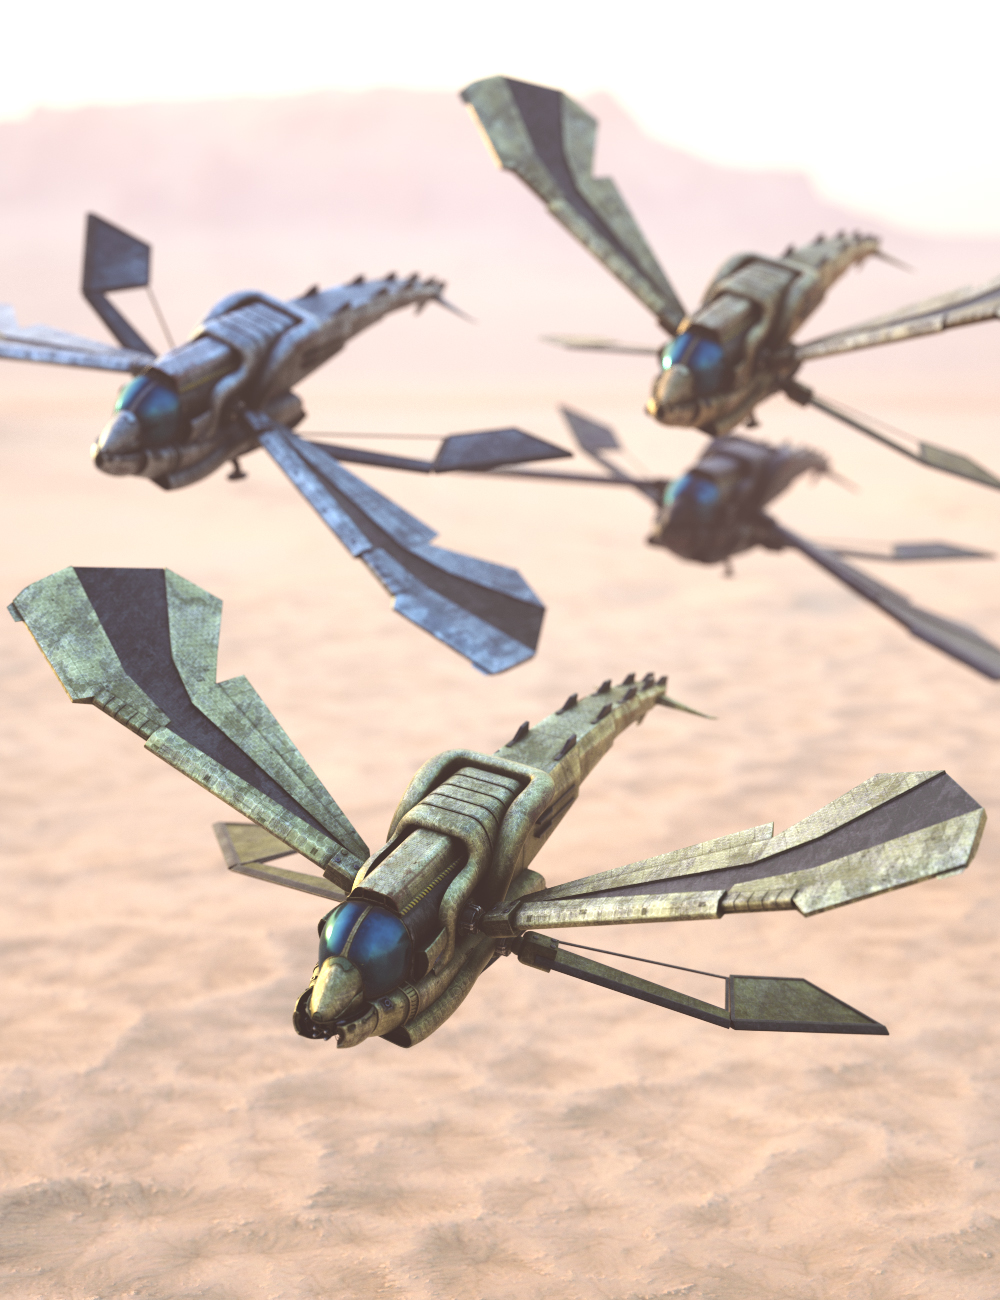 Attack Ornithopter by: Xivon, 3D Models by Daz 3D